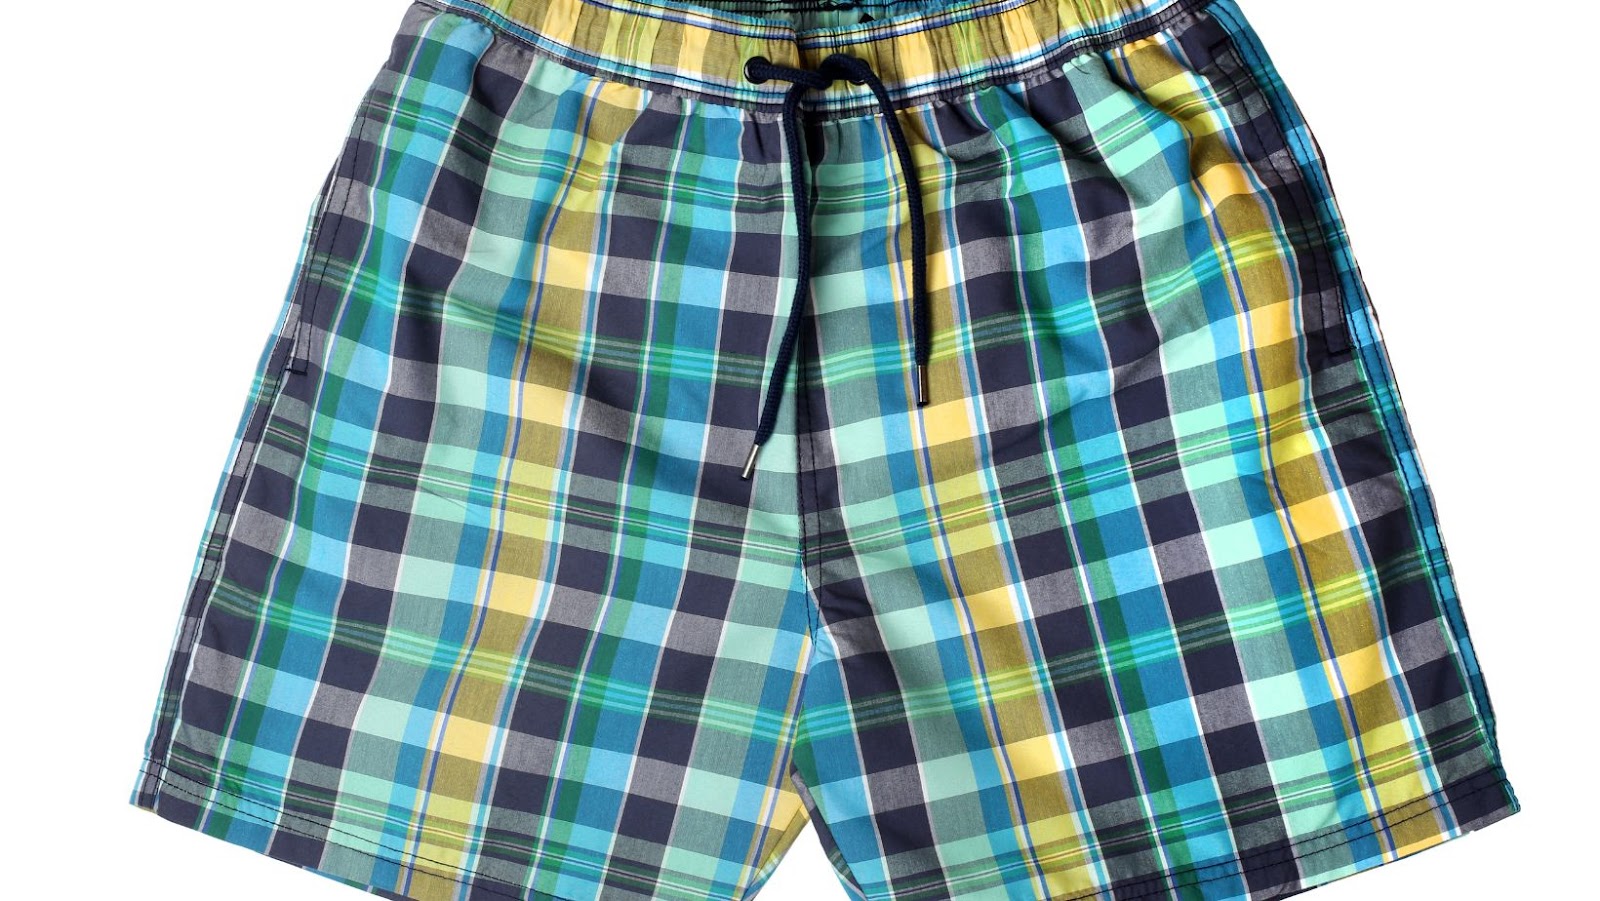 How to Choose the Right Underwear for Wearing Under Swim Trunks